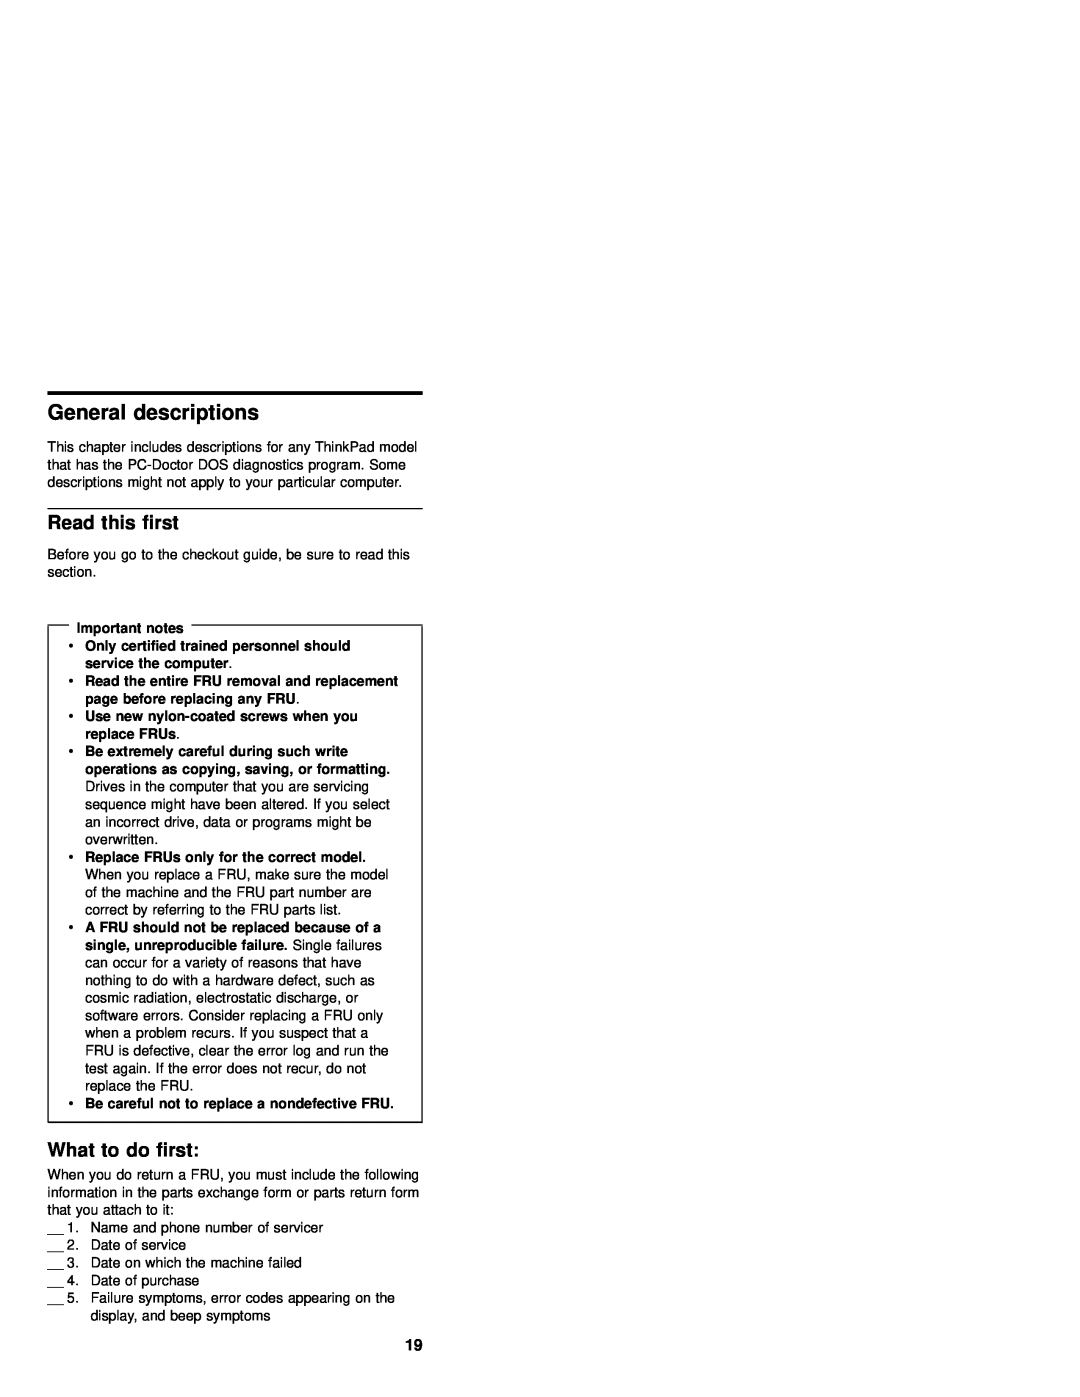 IBM MT 2632 manual General descriptions, Read this first, What to do first, Important notes 